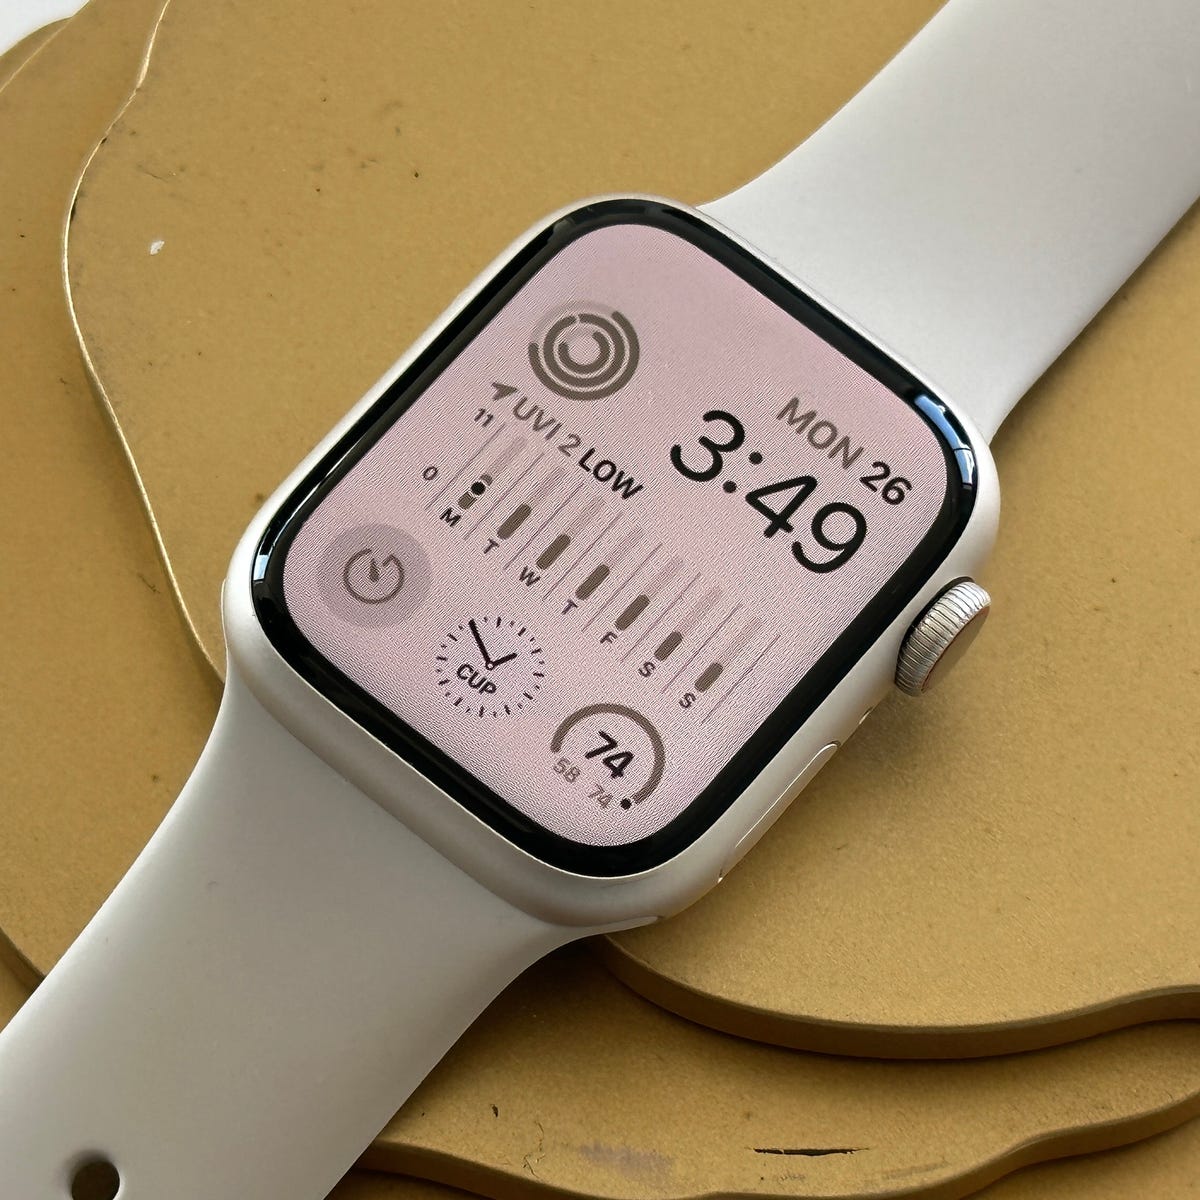 Apple Watch 8 review: A sleeper hit, even if it doesn't match